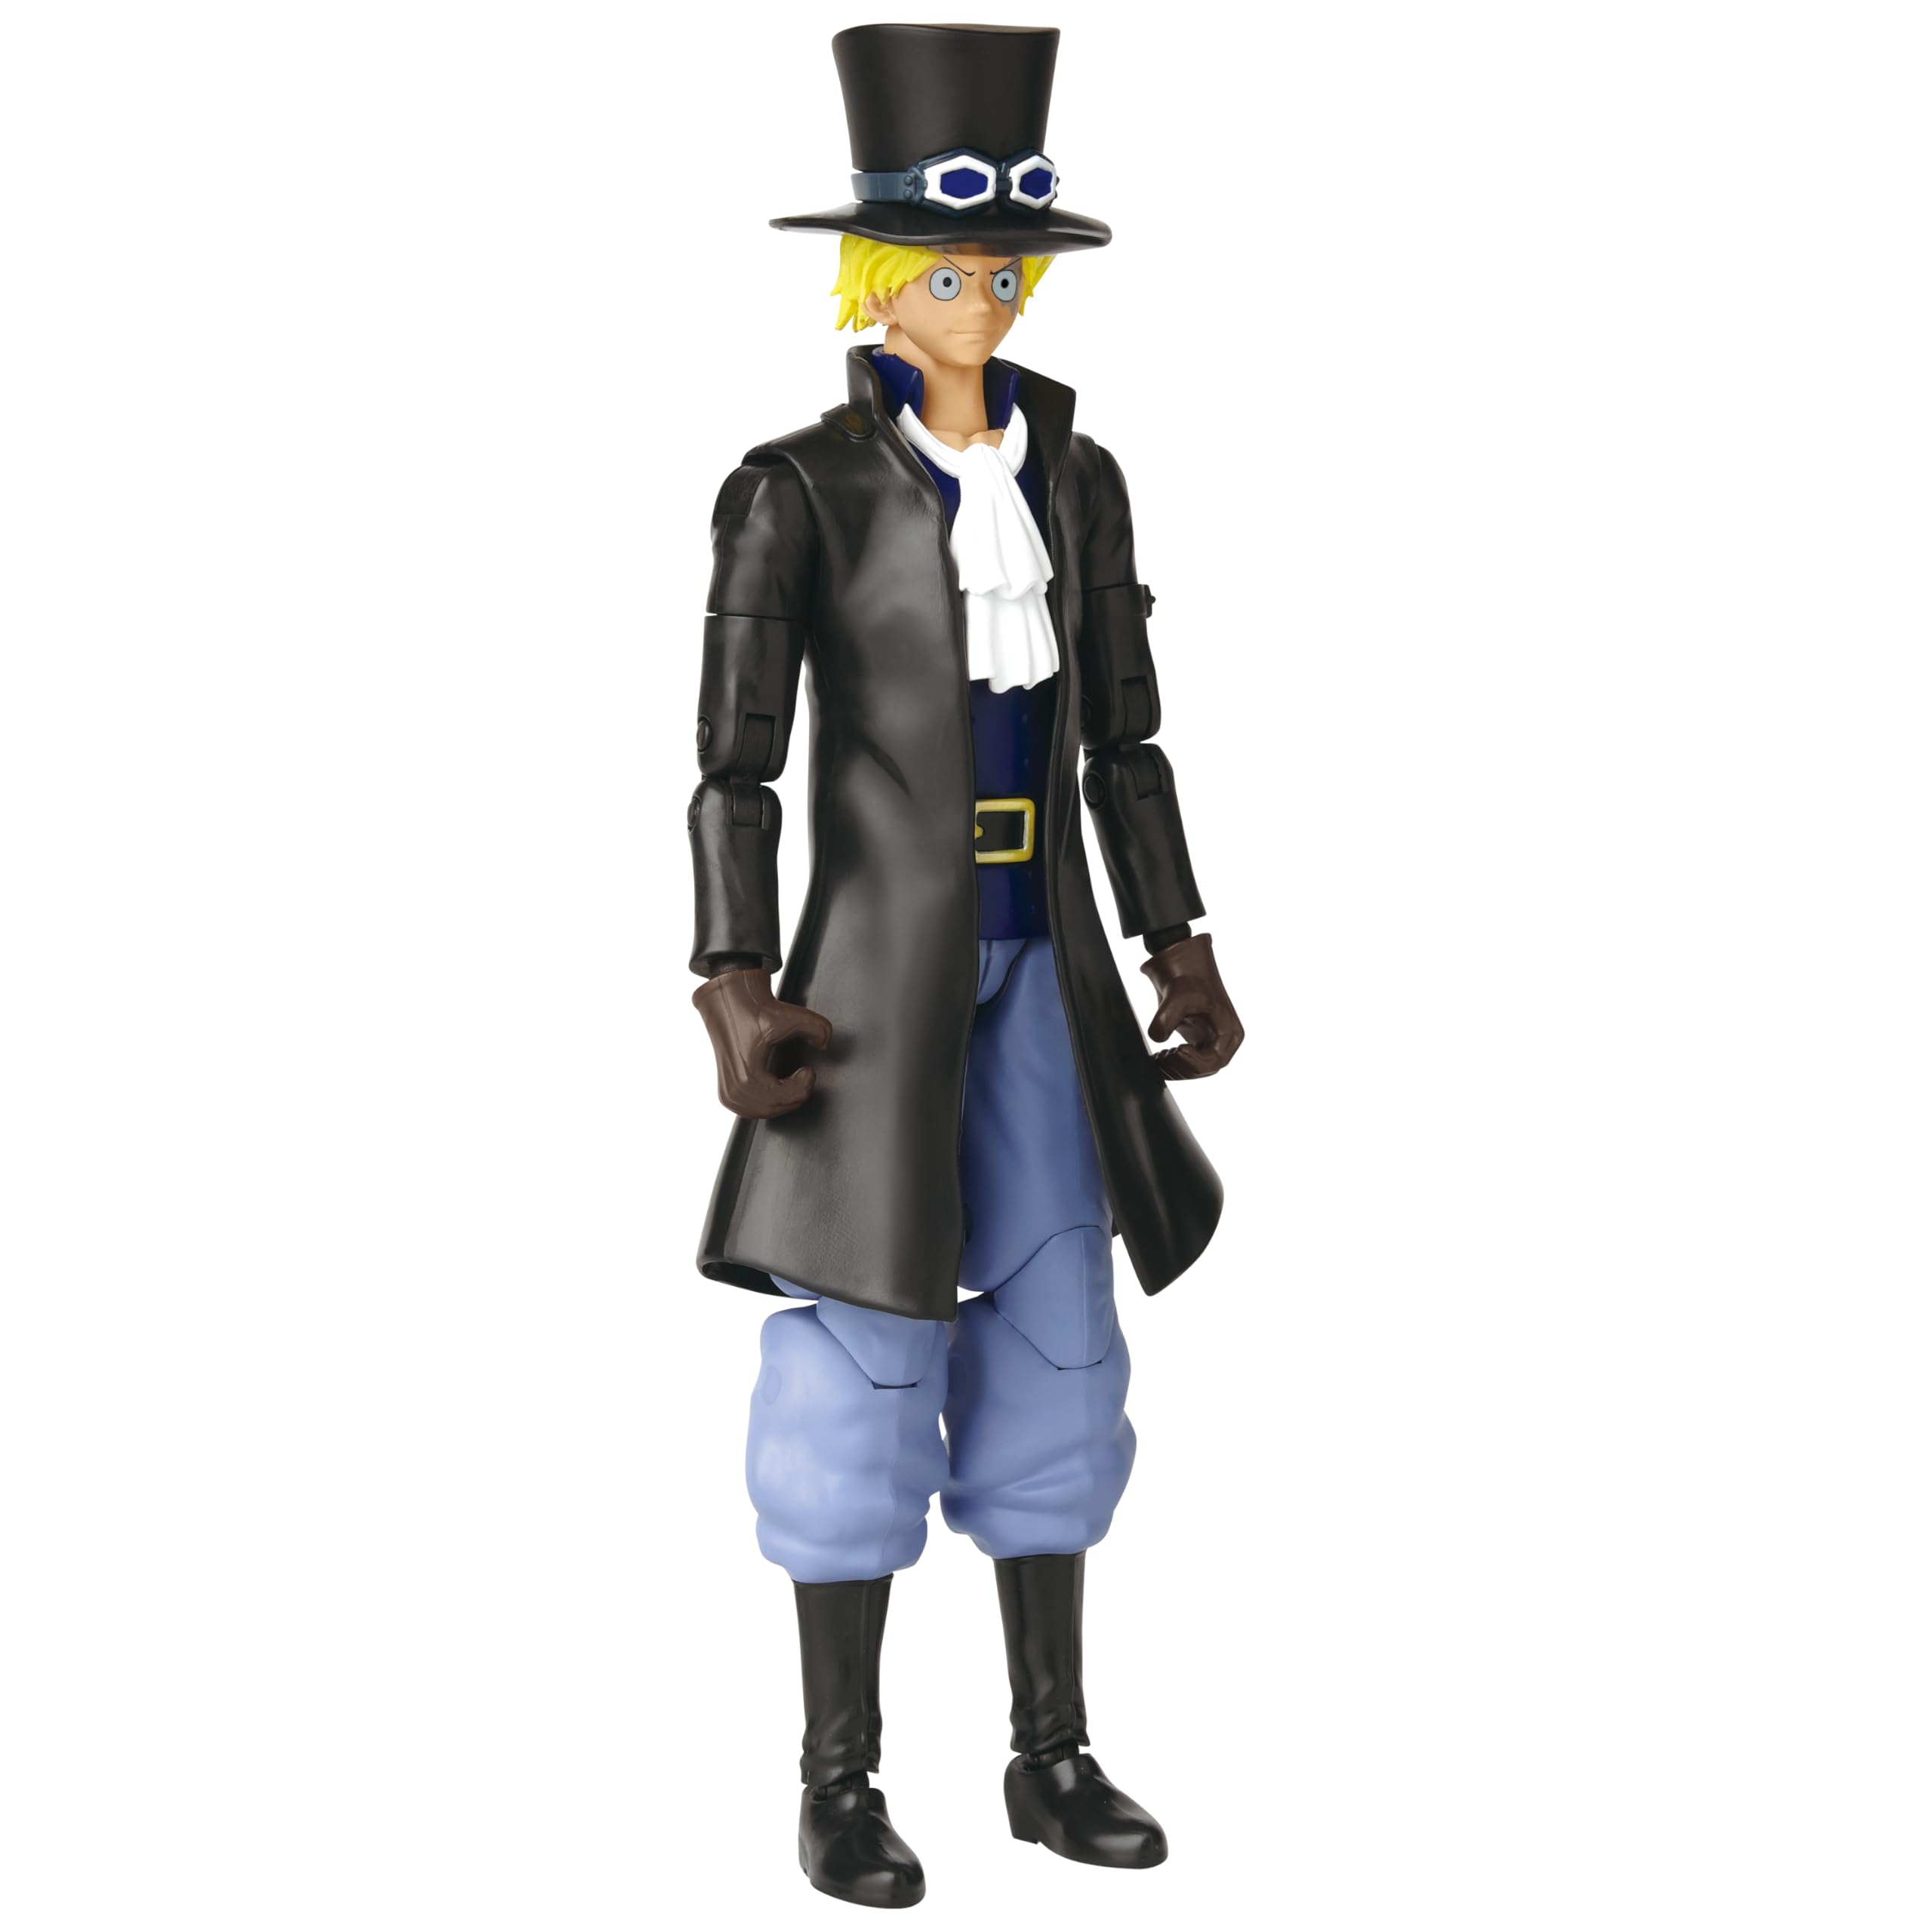 ANIME HEROES - One Piece - Sabo Action Figure